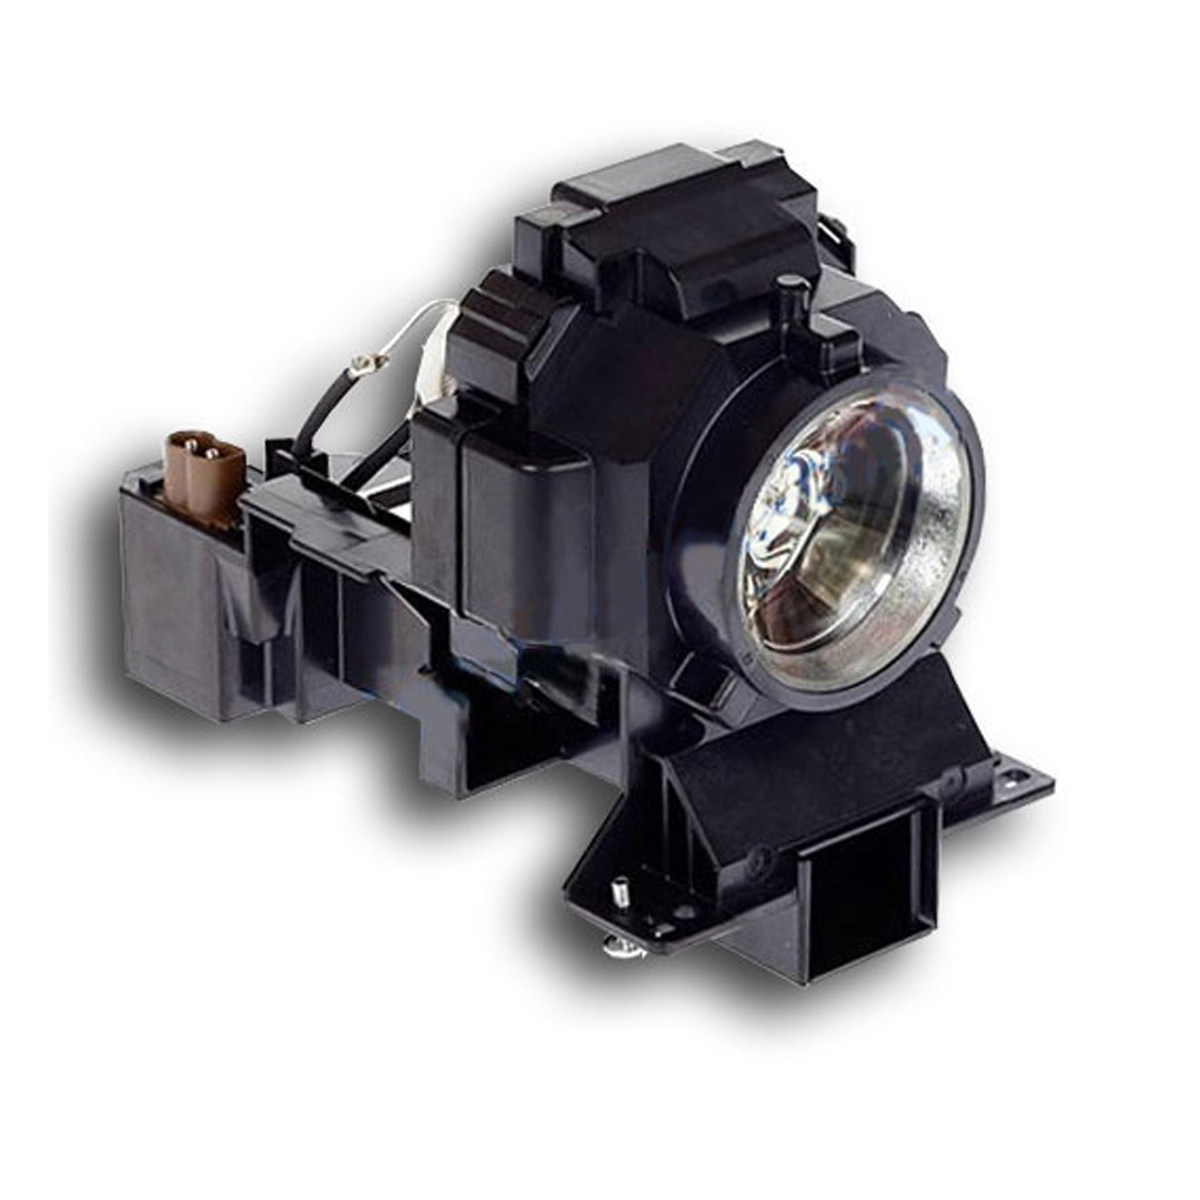 Replacement Projector lamp003-120333-01 For CHRISTIE LX650/VIVID LX650 /VIVID LX900